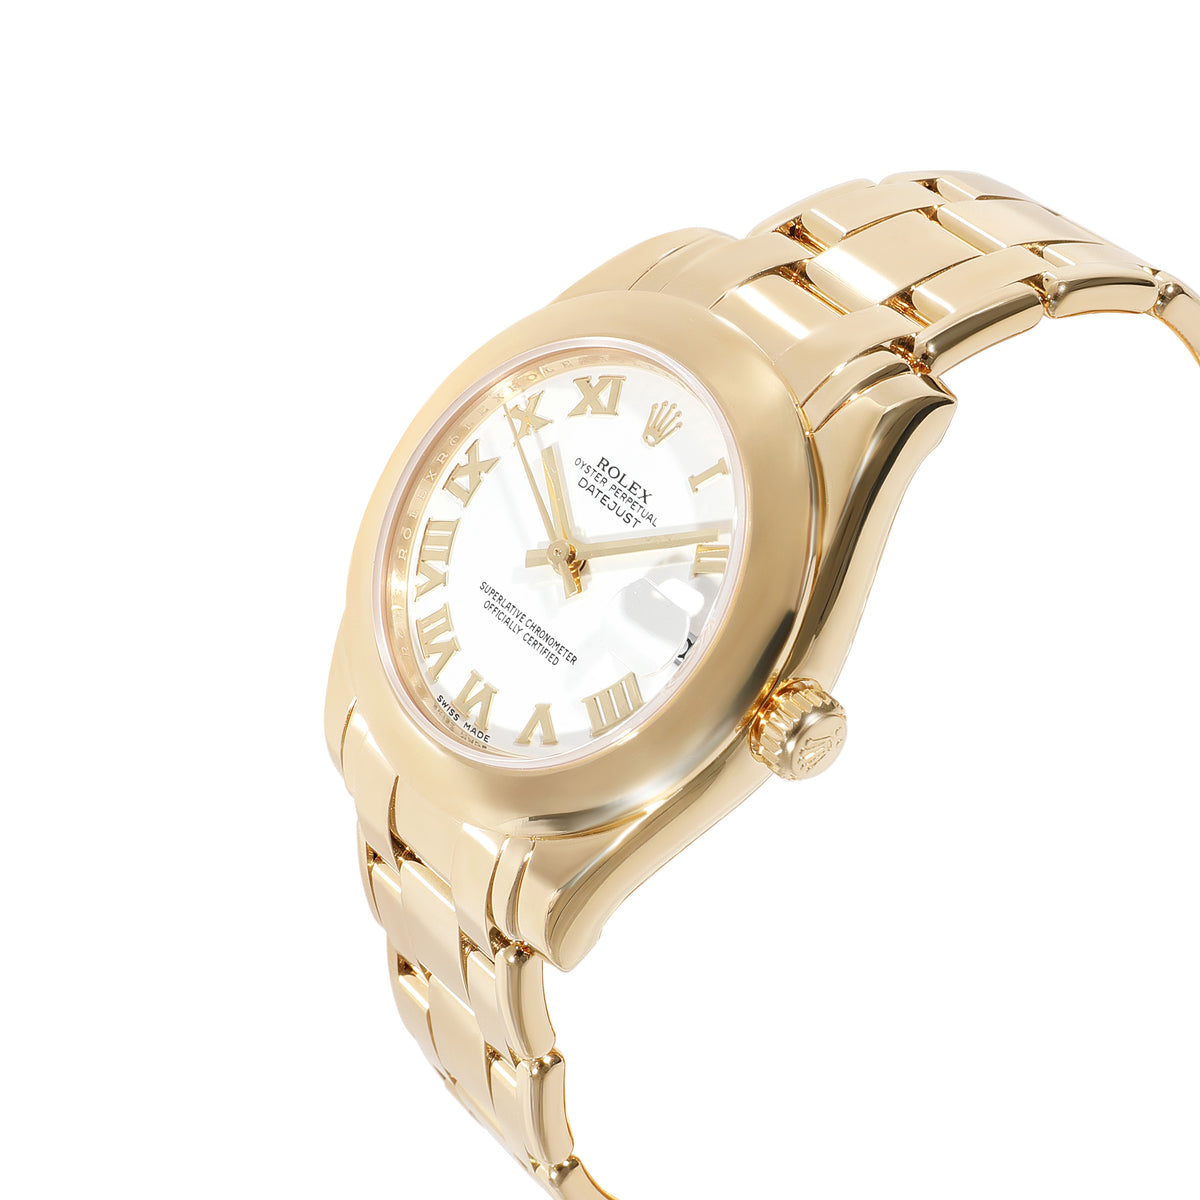 Rolex Pearlmaster 81208 Unisex Watch in 18kt Yellow Gold